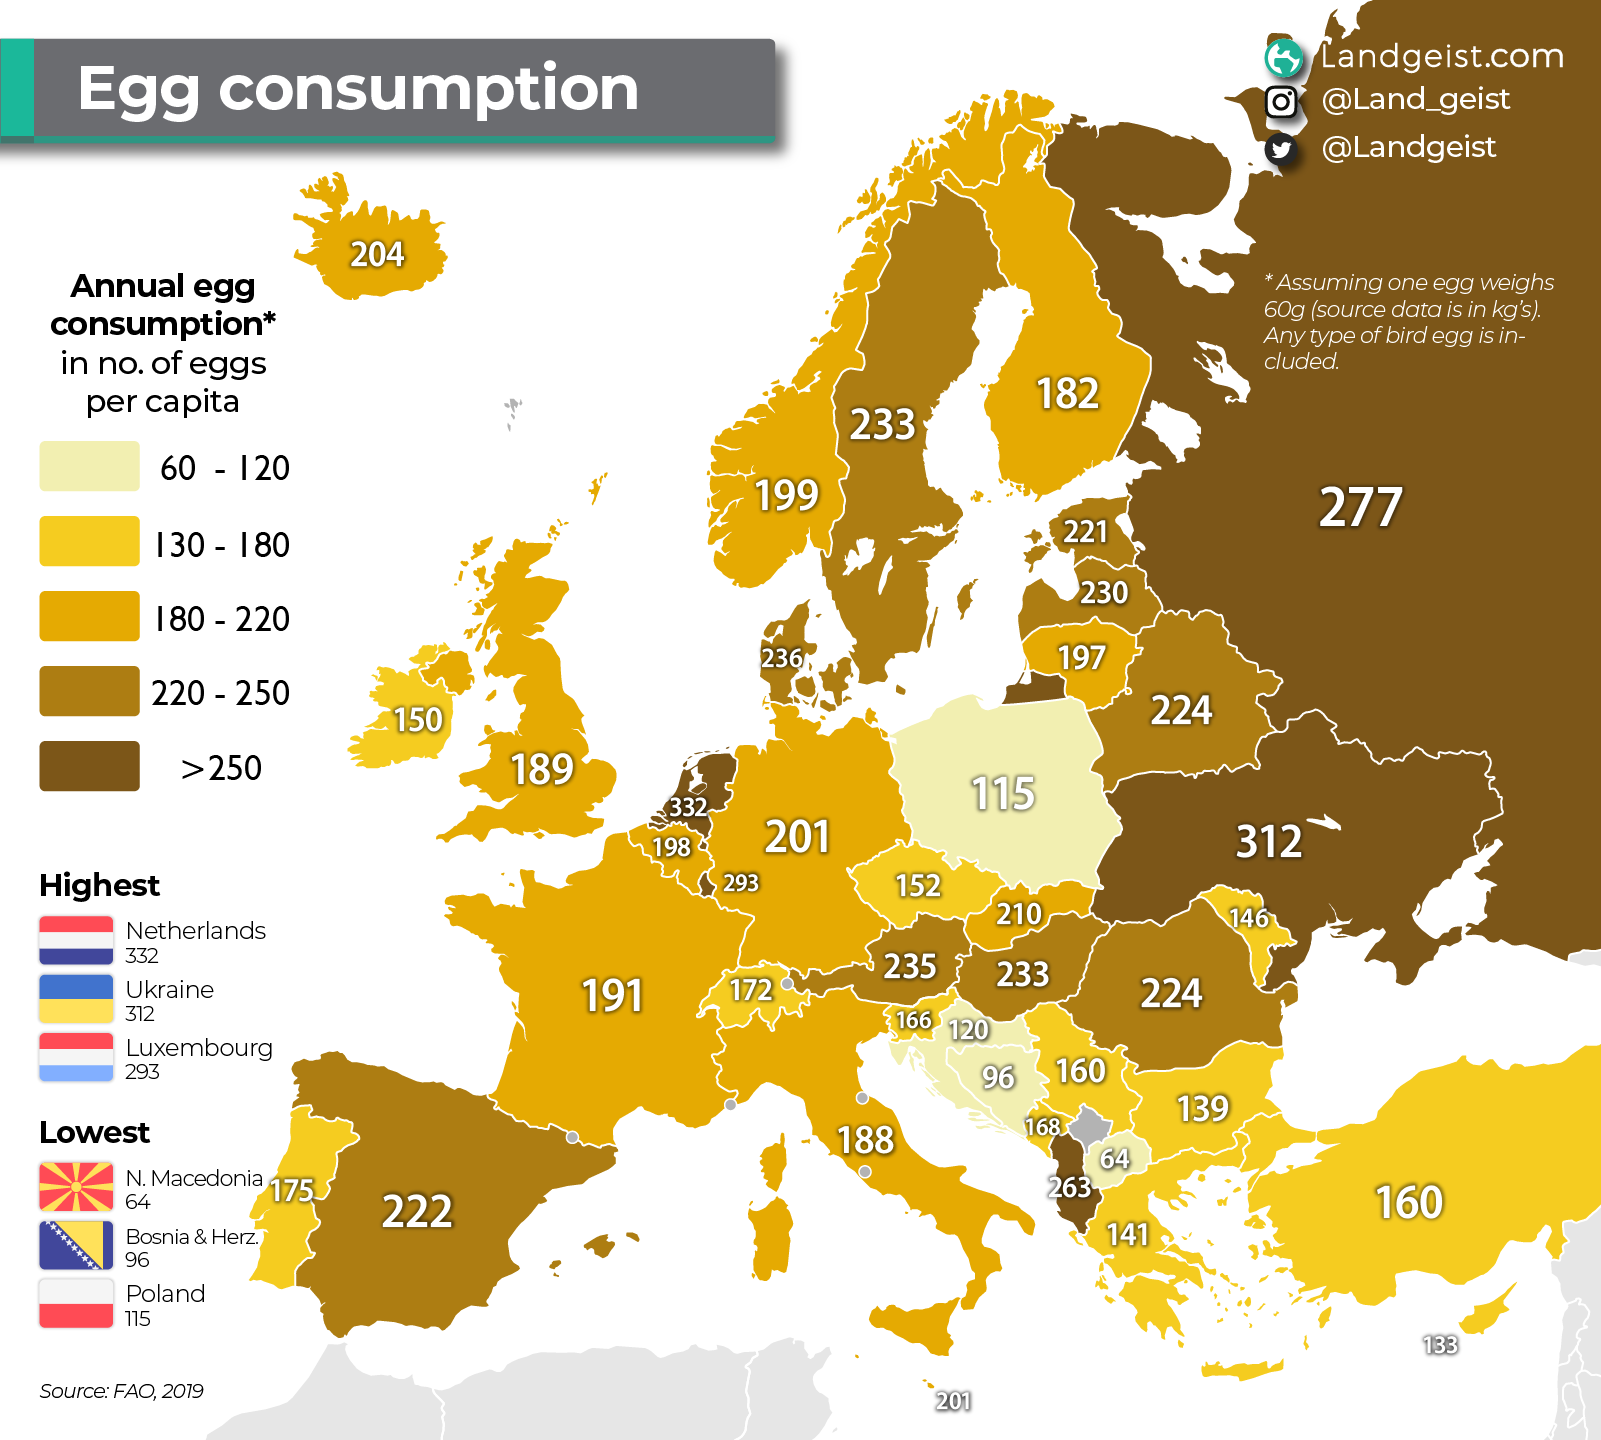 Map of the egg consumption in Europe.